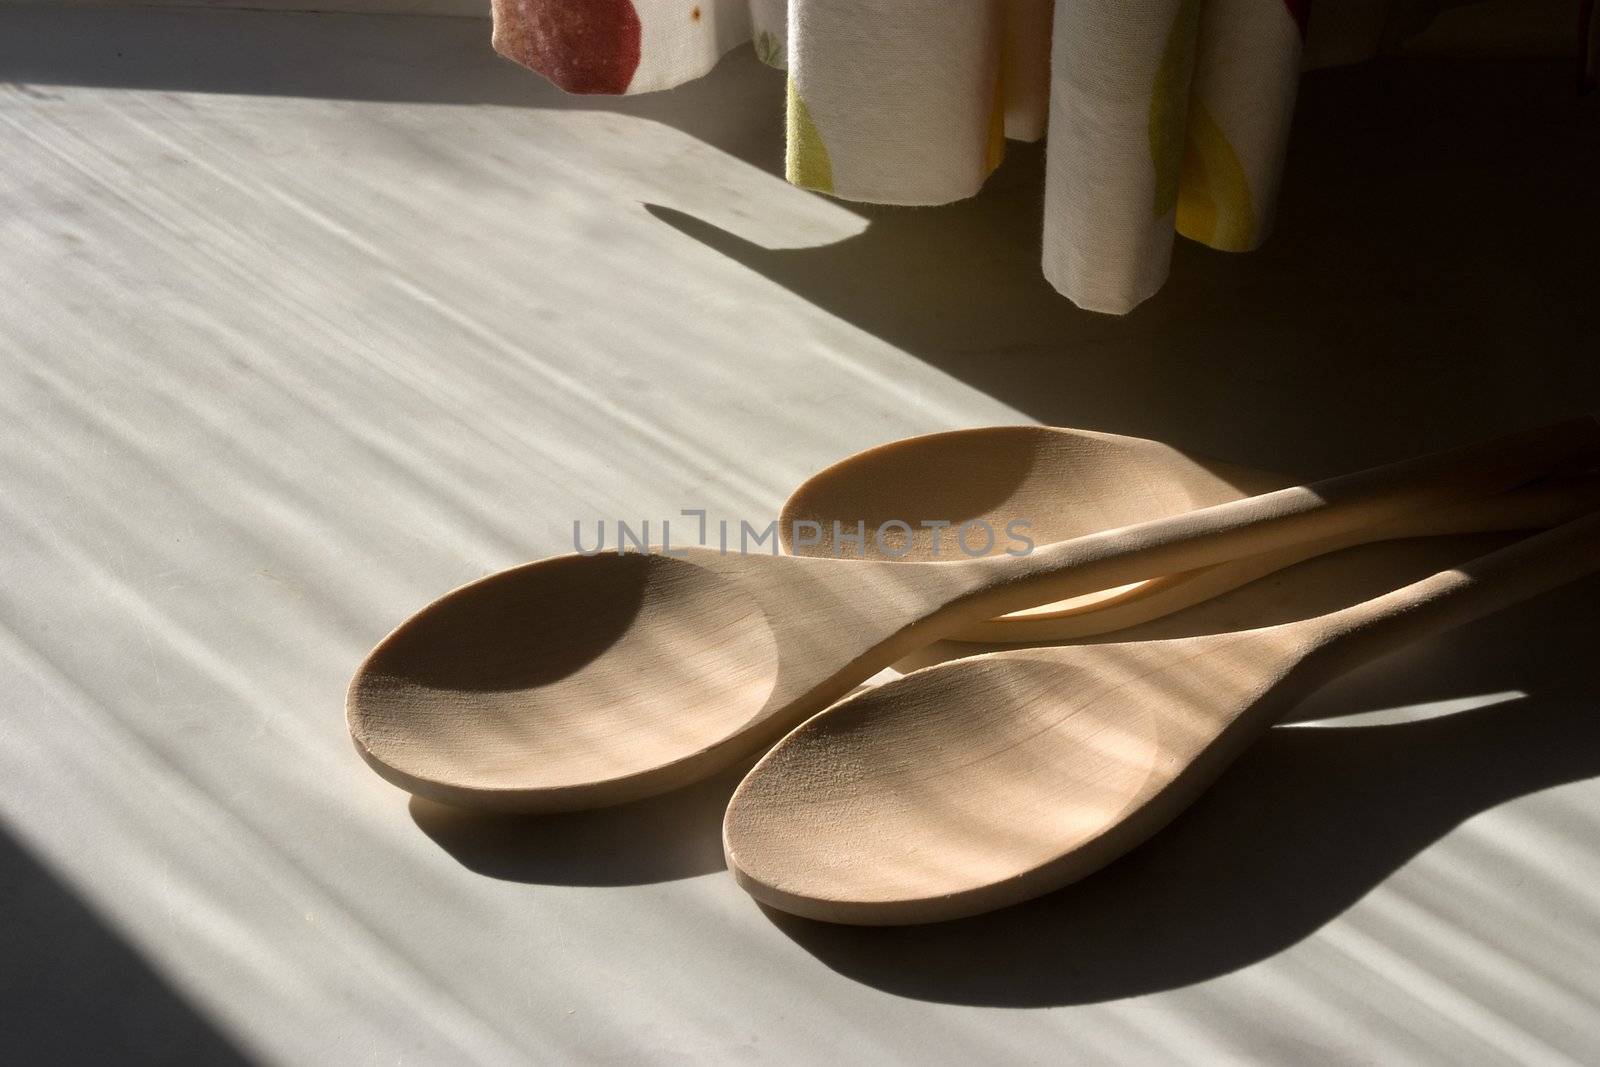 Three wooden spoons in sunlight and shadow on a kitchen work surface